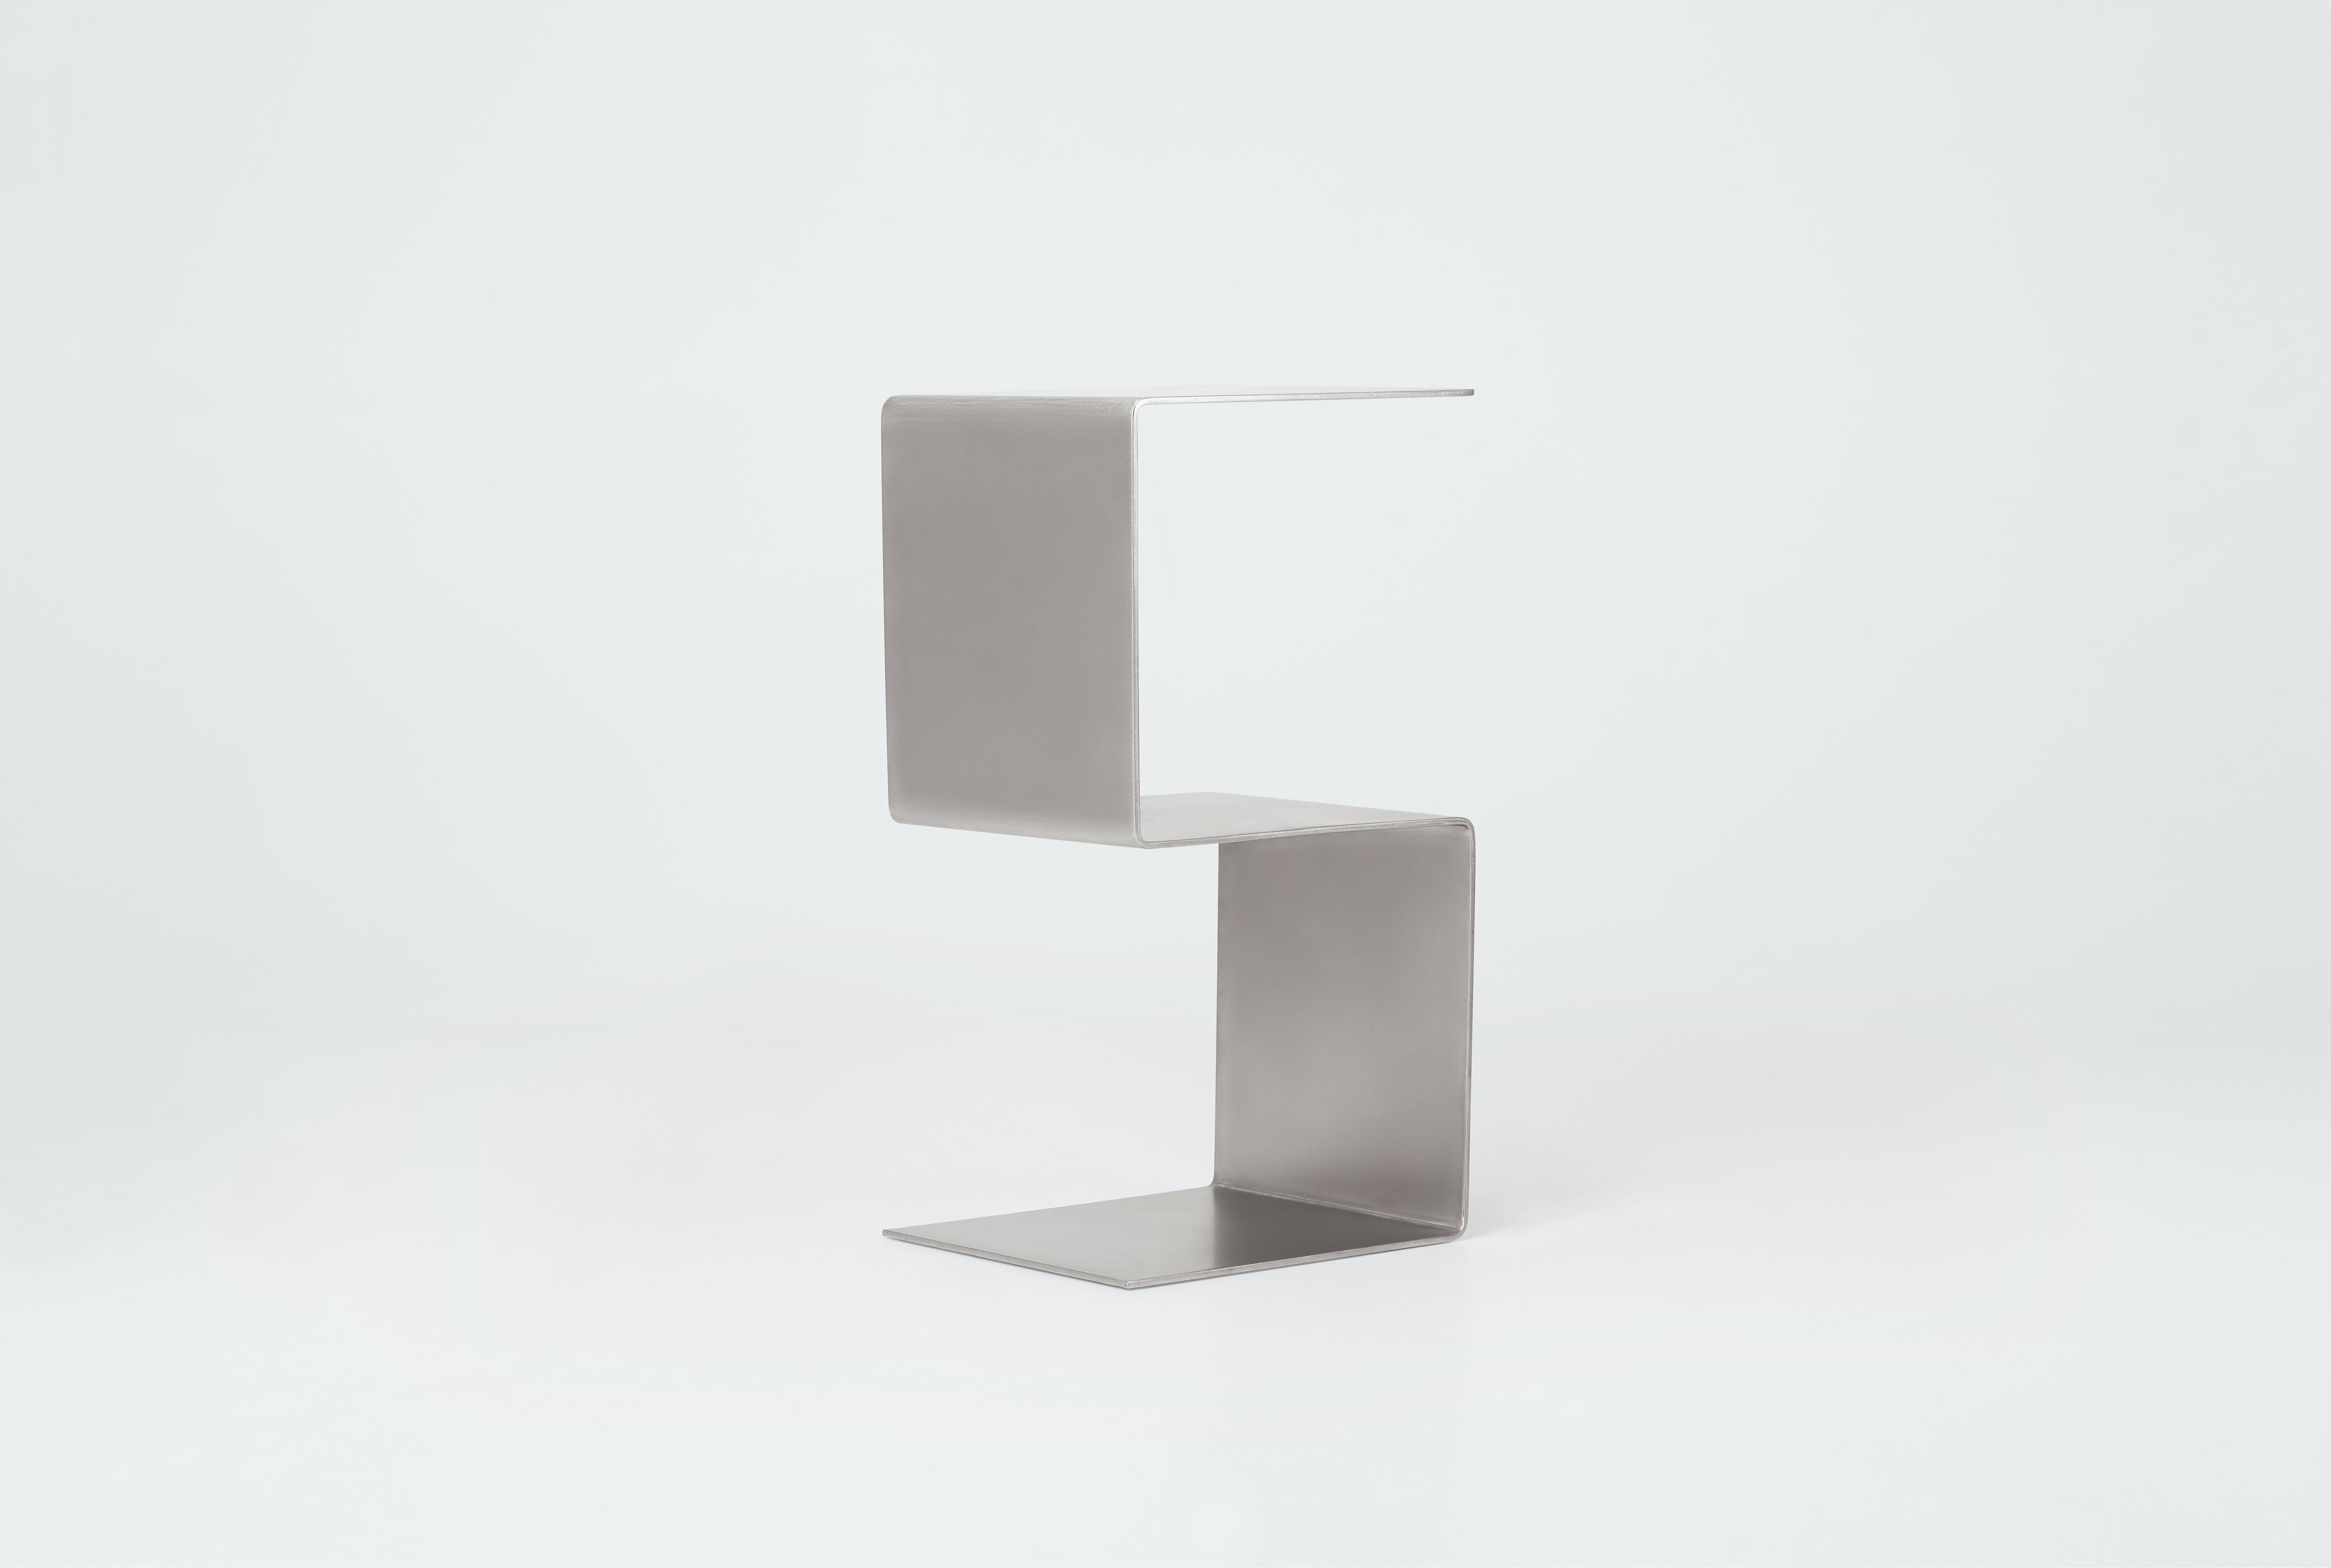 Immerse yourself in the sleek sophistication of this meticulously crafted side table, precision-engineered from durable 5mm stainless steel. With its contemporary allure, this table is the perfect addition to modern and contemporary homes.

The use